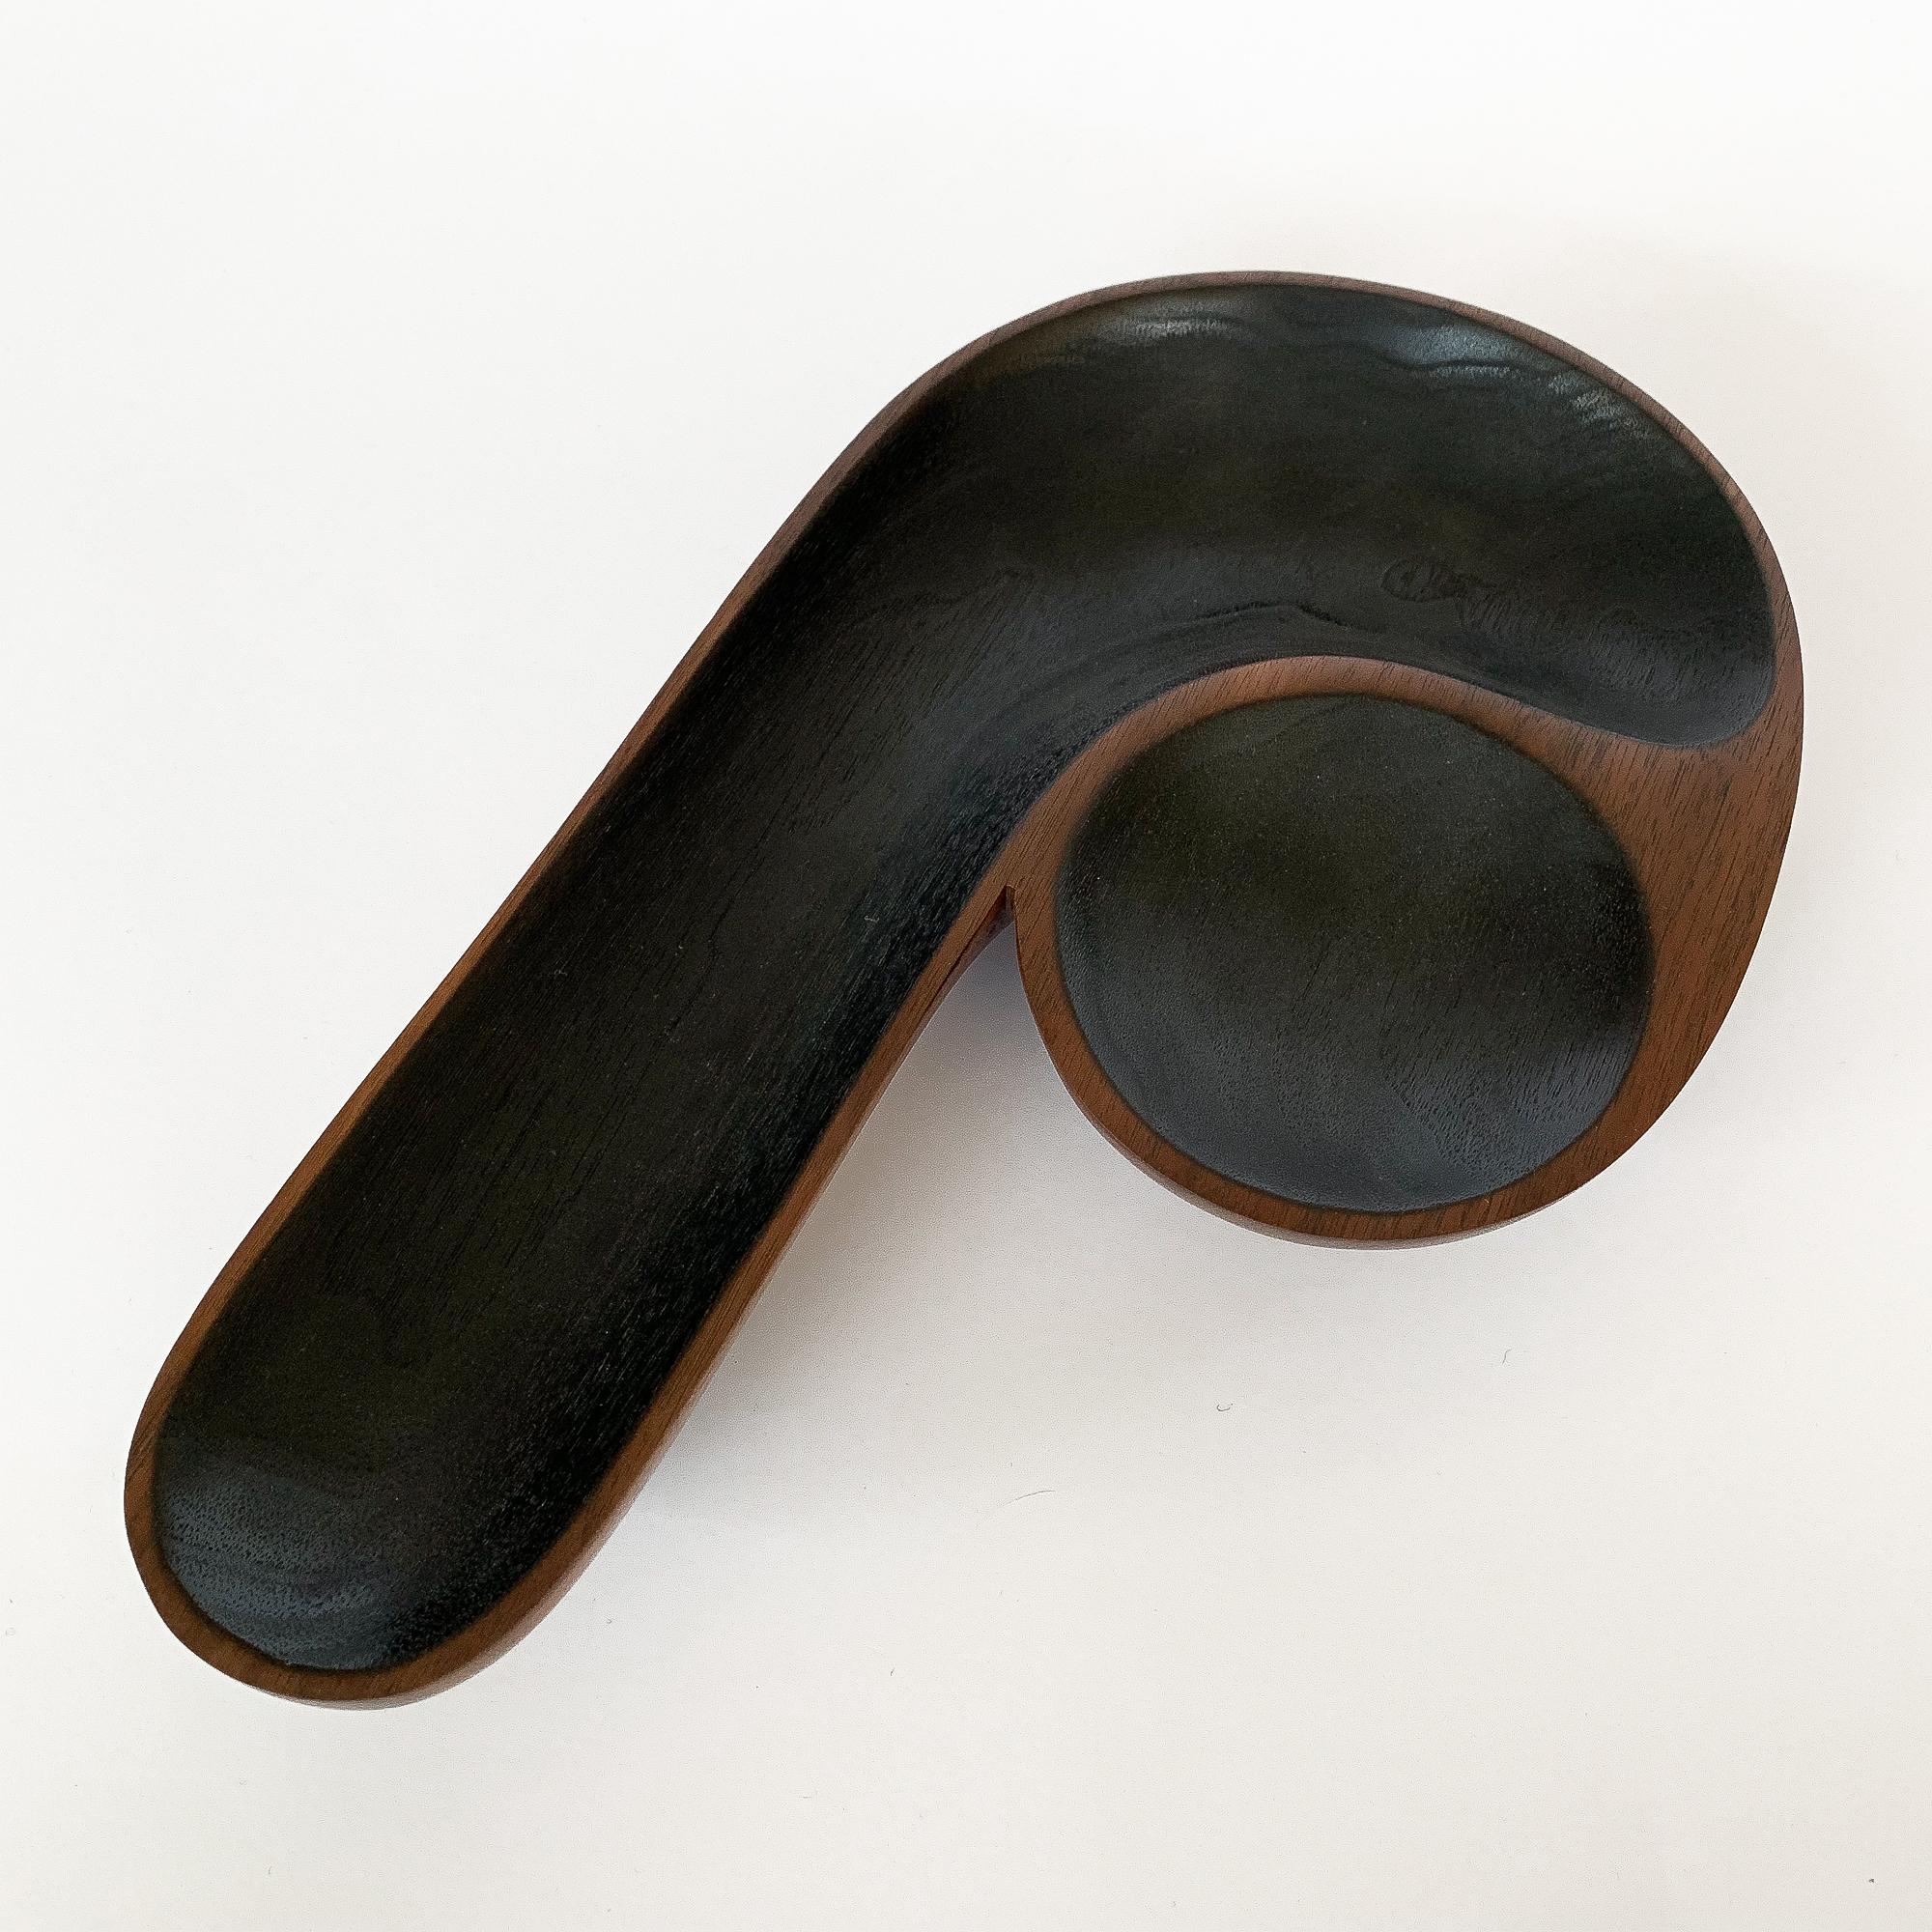 Large sculptural hand carved black ebonized walnut bowl from the Native Tongue collection by Foxwood Co. Foxwood Co. is the work of Casey Reed Johnson, a designer and sculptor whose work is inspired by function and driven by form. His current work